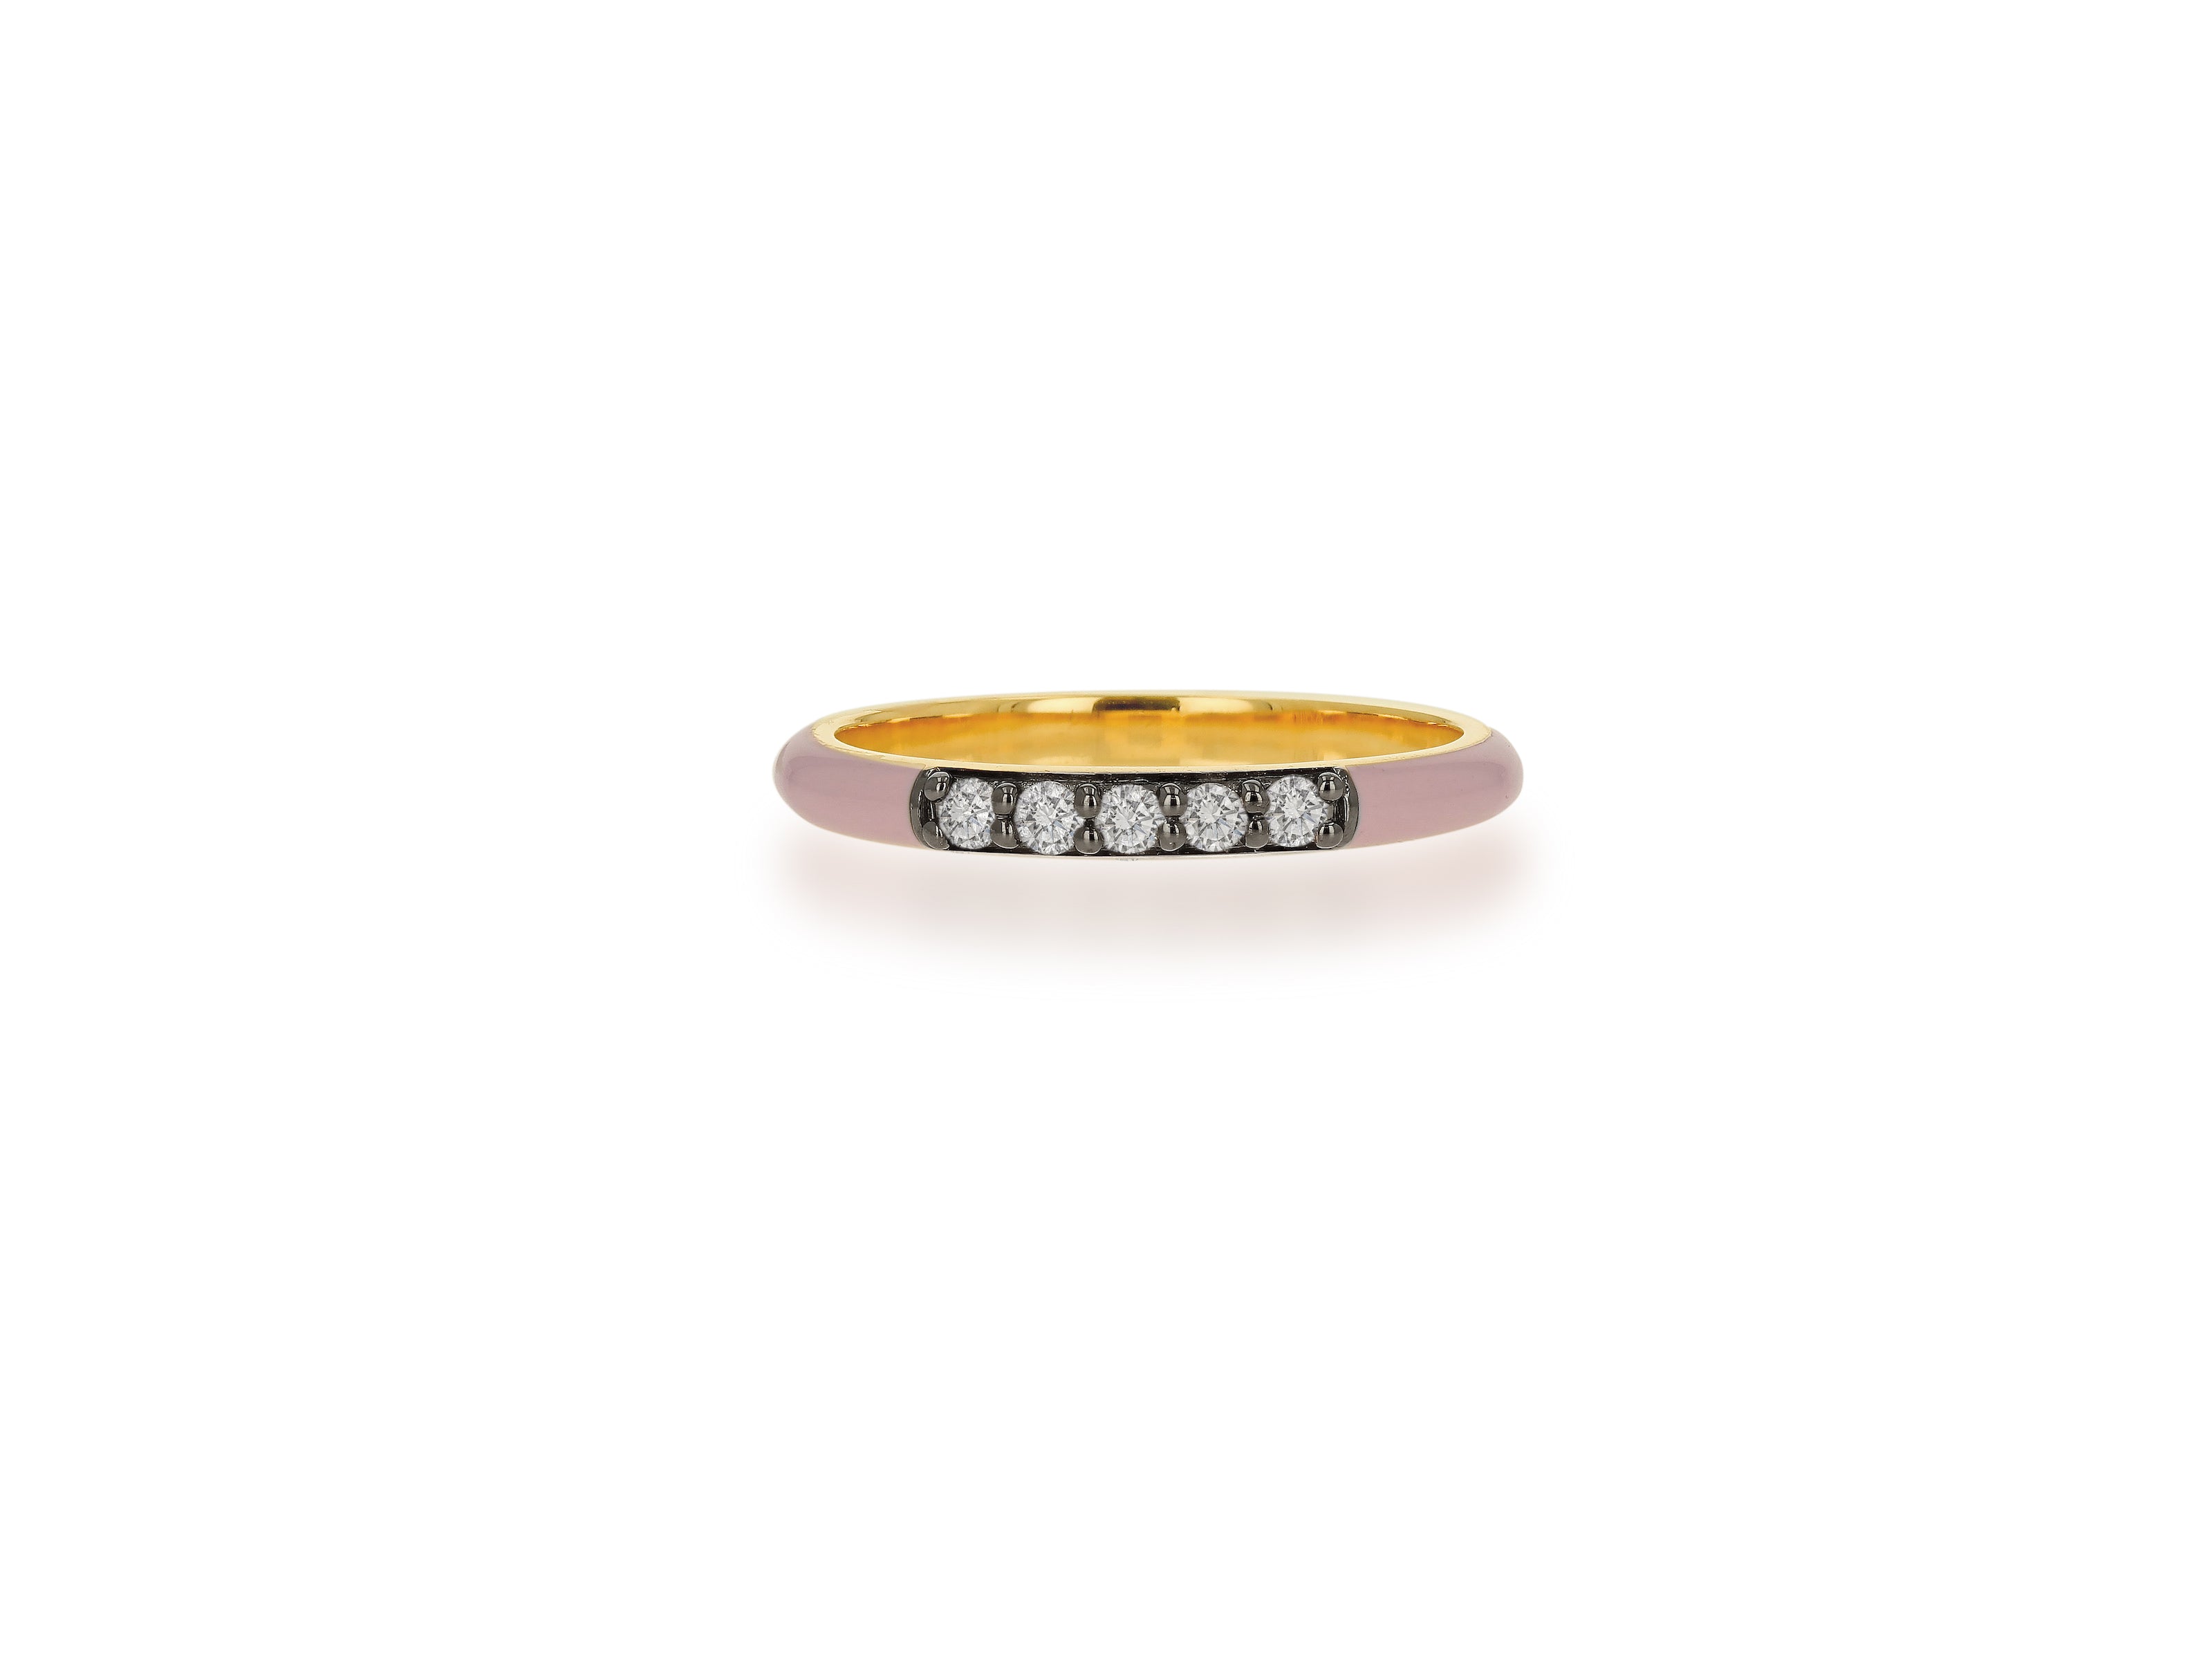 Dusty Rose Pink Enamel and Diamond Band Ring